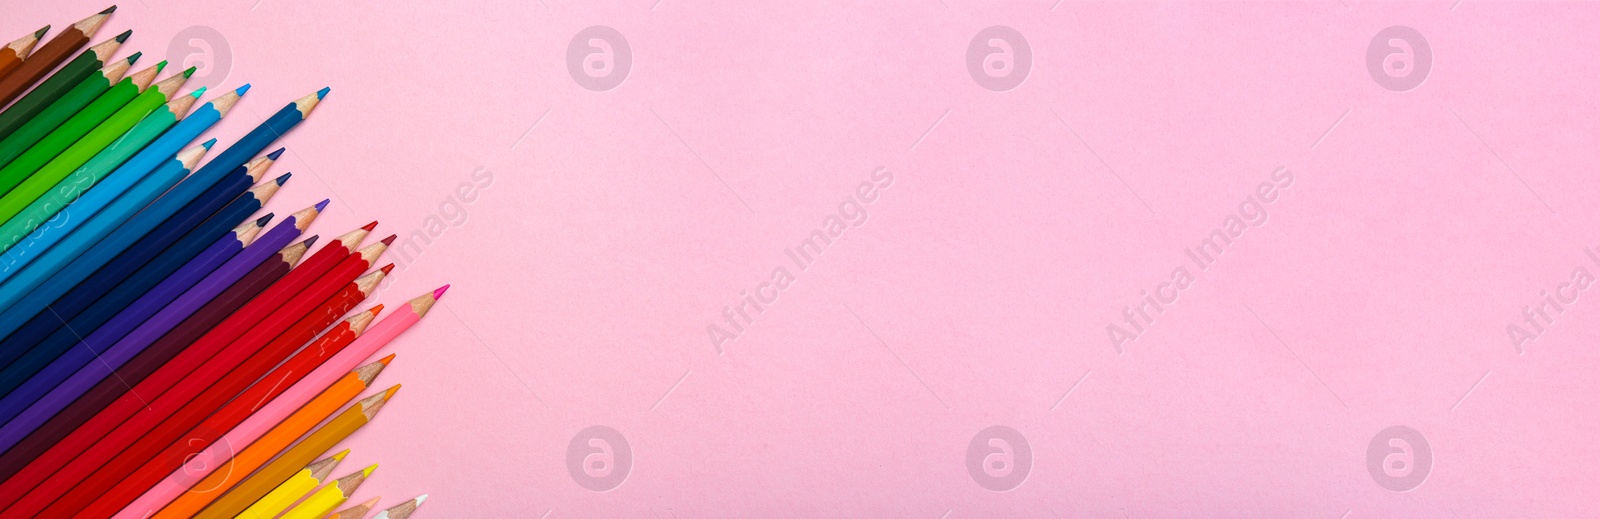 Image of Color pencils on pink background, flat lay with space for text. Banner design